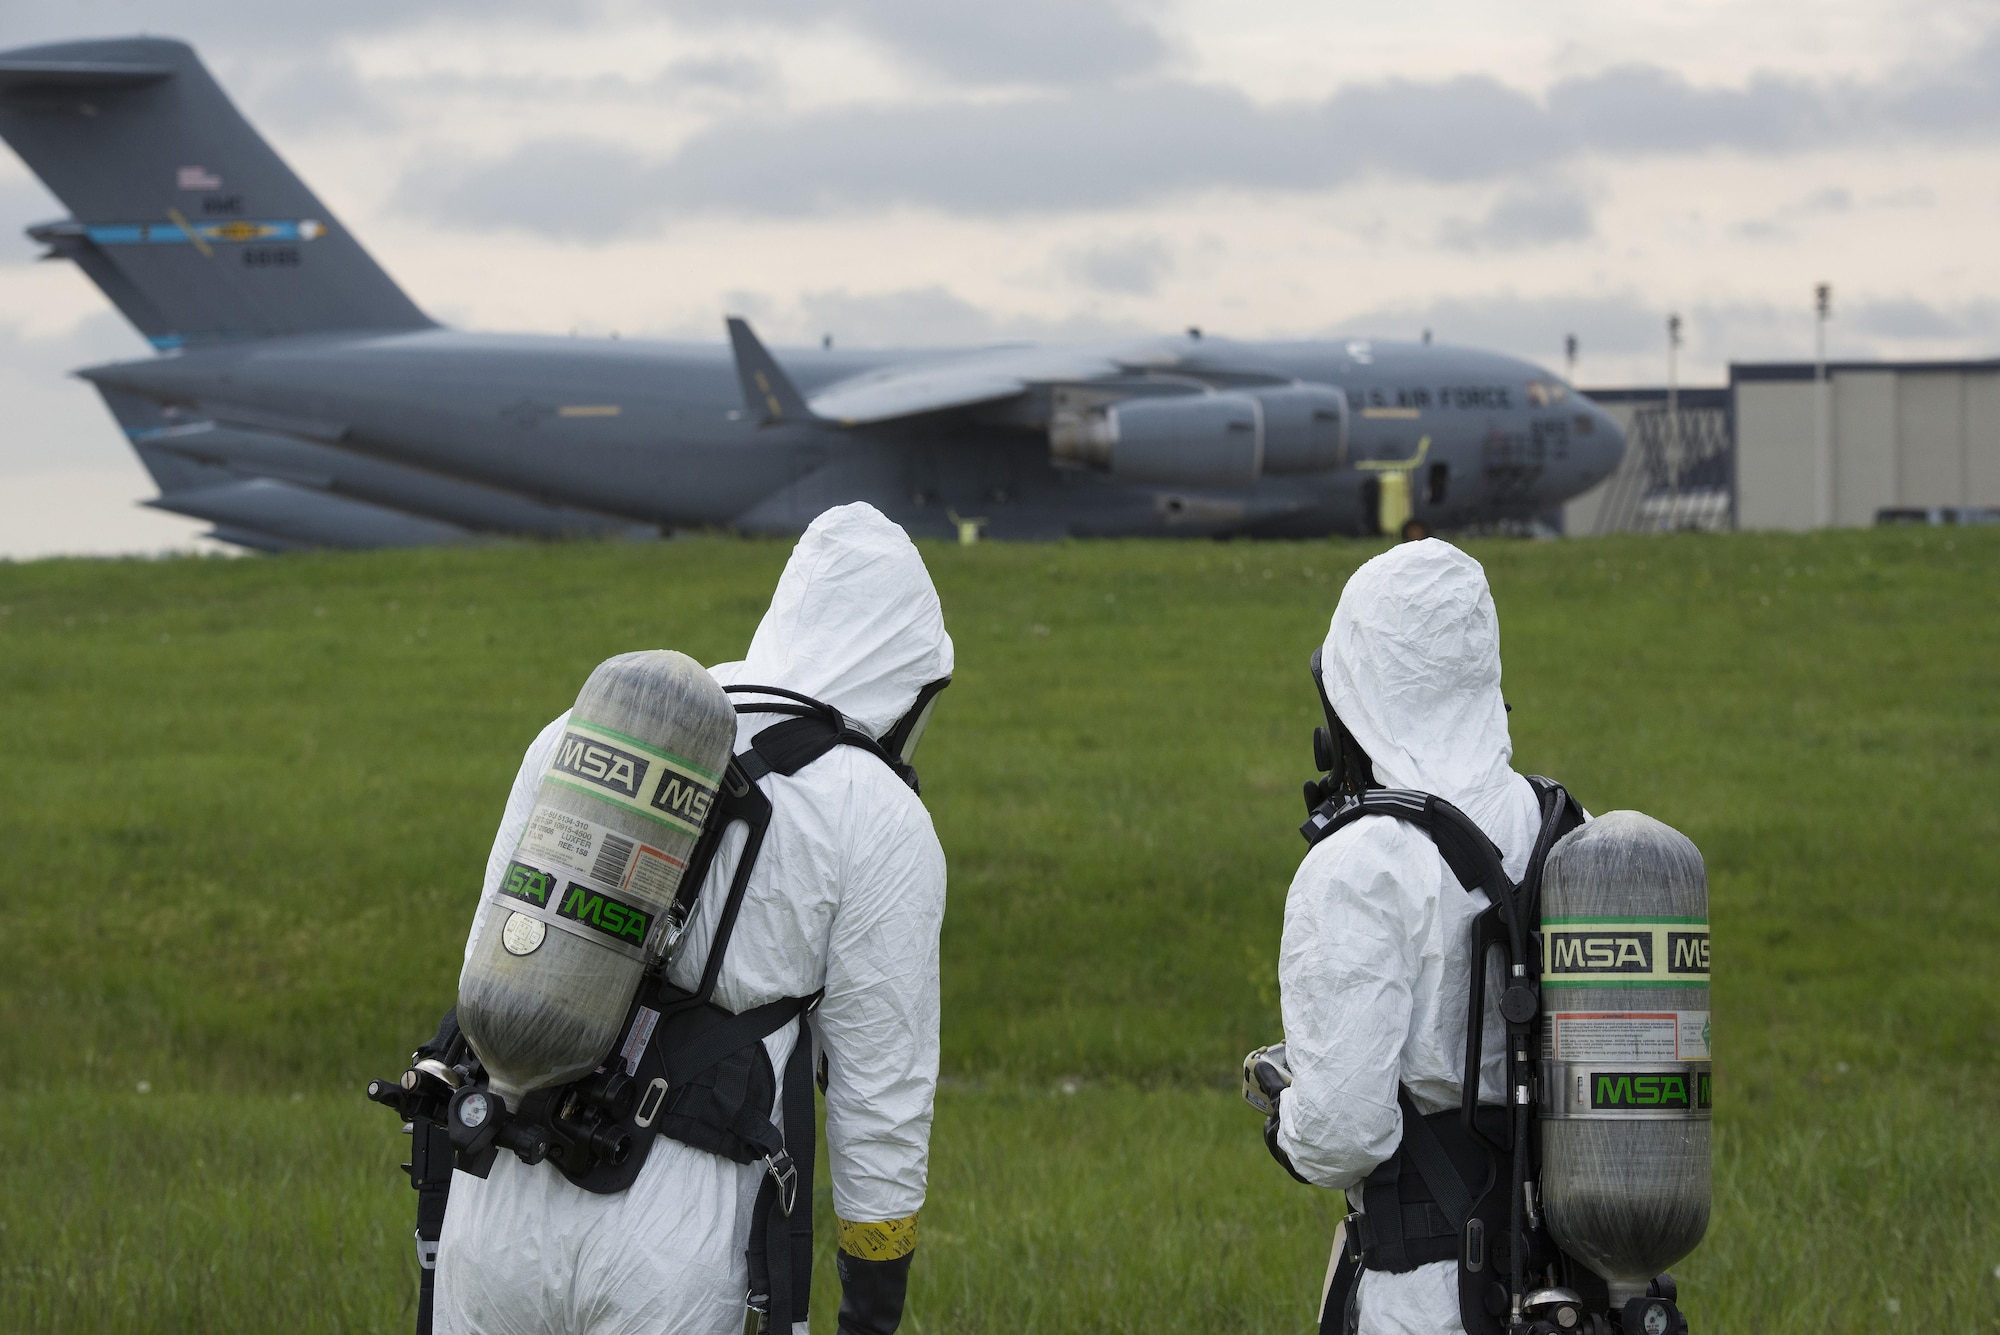 Senior Airmen Alexander Delfs (left) and Jorge Rijo, 436th Aerospace Medicine Squadron bioenvironmental engineering technicians, monitor air quality for airborne hydrocarbons April 20, 2017, near a flightline drainage spill gate on Dover Air Force Base, Del. Airborne hydrocarbon concentrations are strong indicators of potential combustion and inhalation risks. (U.S. Air Force photo by Senior Airman Aaron J. Jenne)